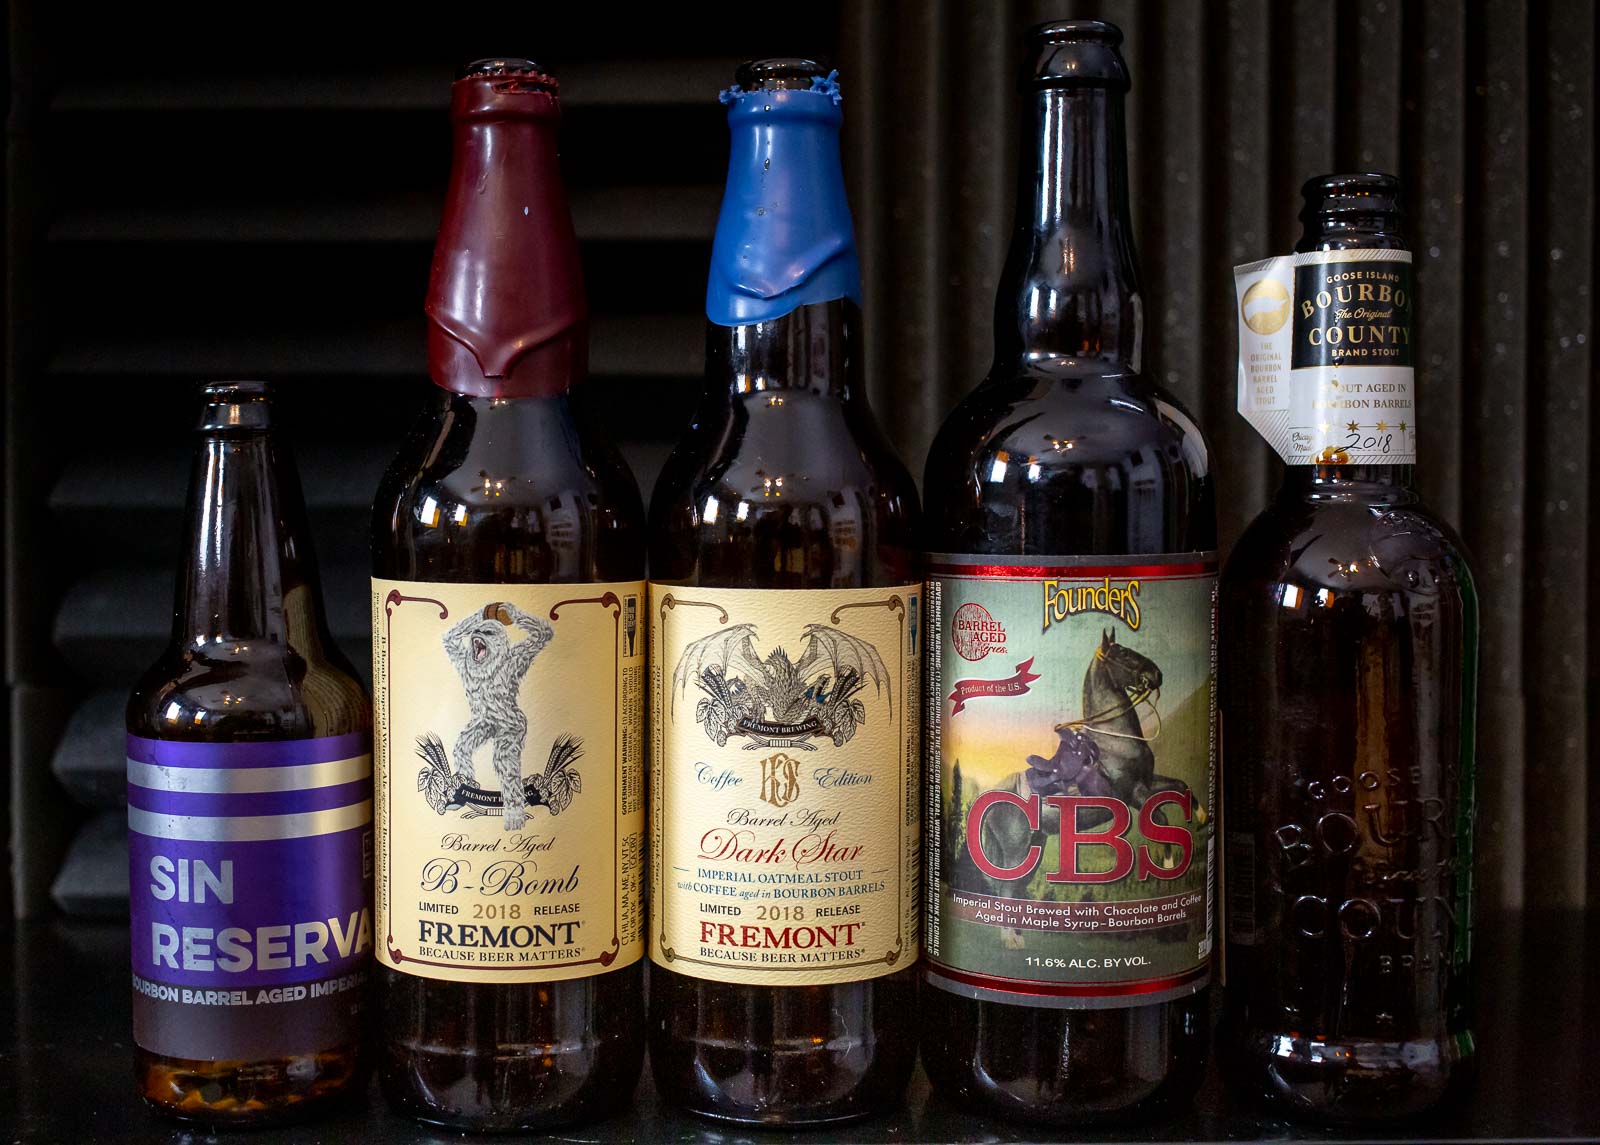 Pictured: Five bottles of barrel-aged beer from Trustworthy Brewing, Fremont Brewing, Founders Brewing, and Goose Island